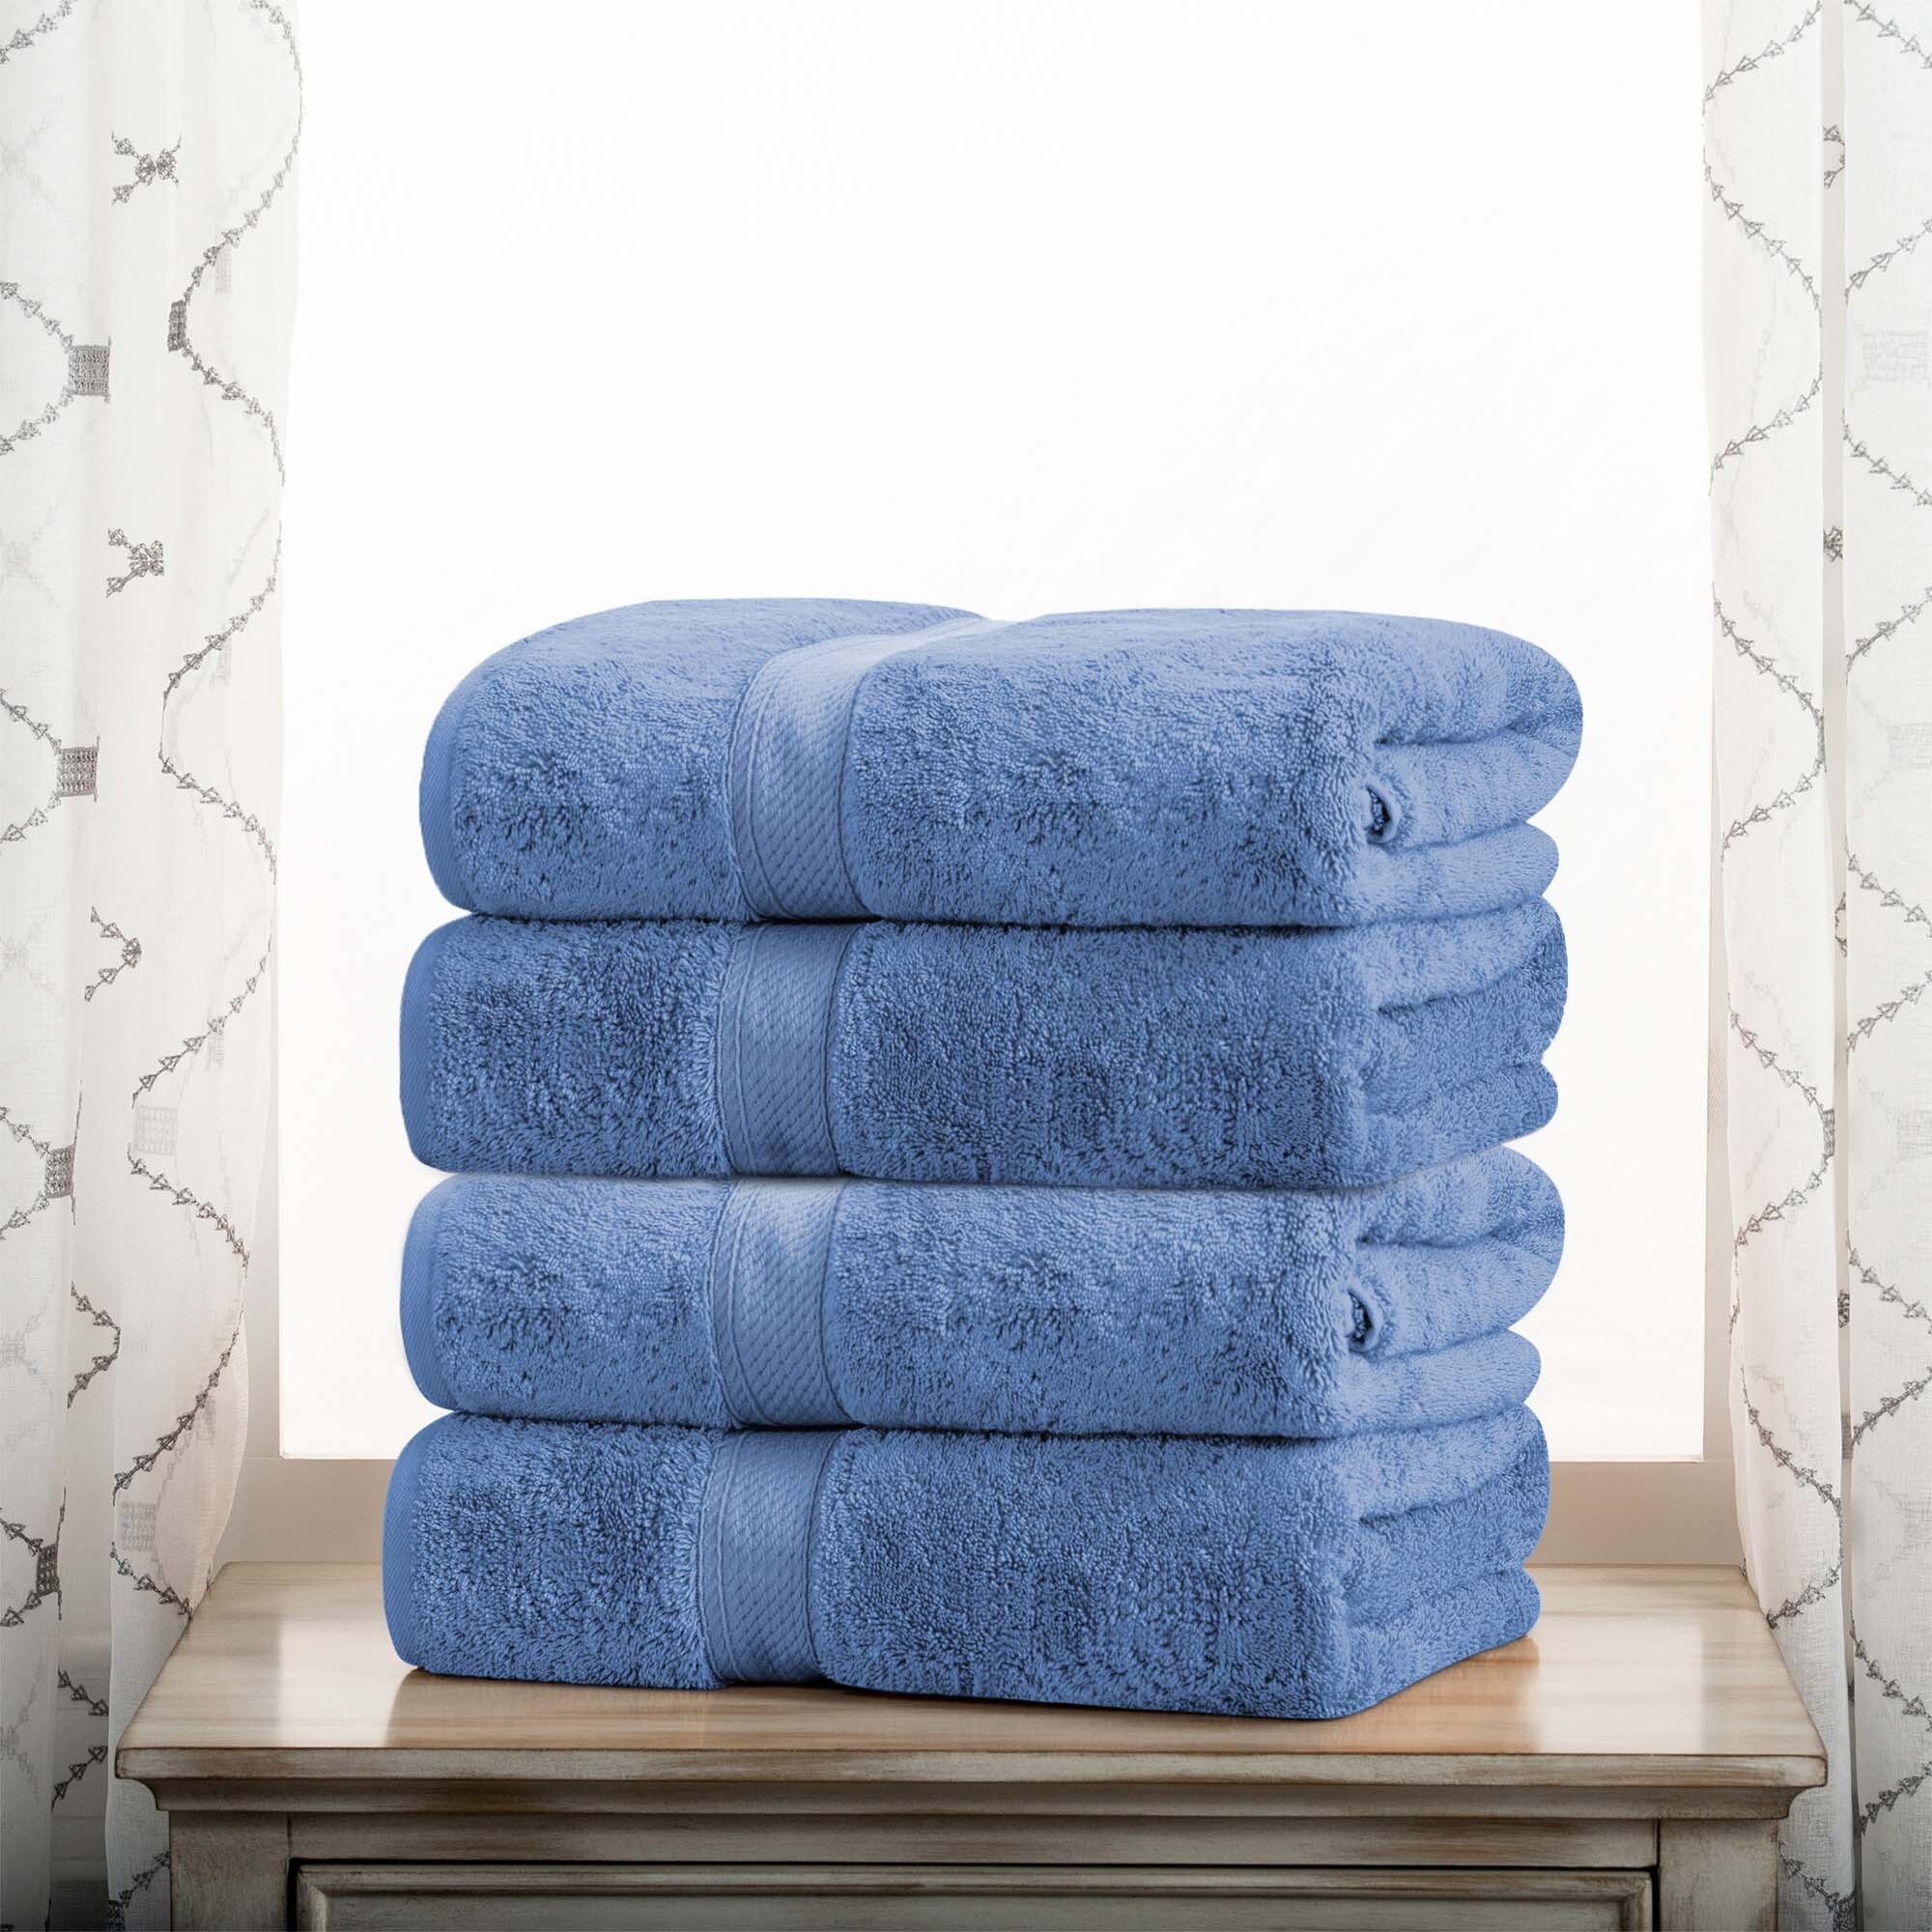 https://ak1.ostkcdn.com/images/products/is/images/direct/0c7d6b5e2be331d9e8ca204304222b1a44734359/Superior-Madison-Egyptian-Cotton-Heavyweight-Luxury-Bath-Towel-Set-of-4.jpg